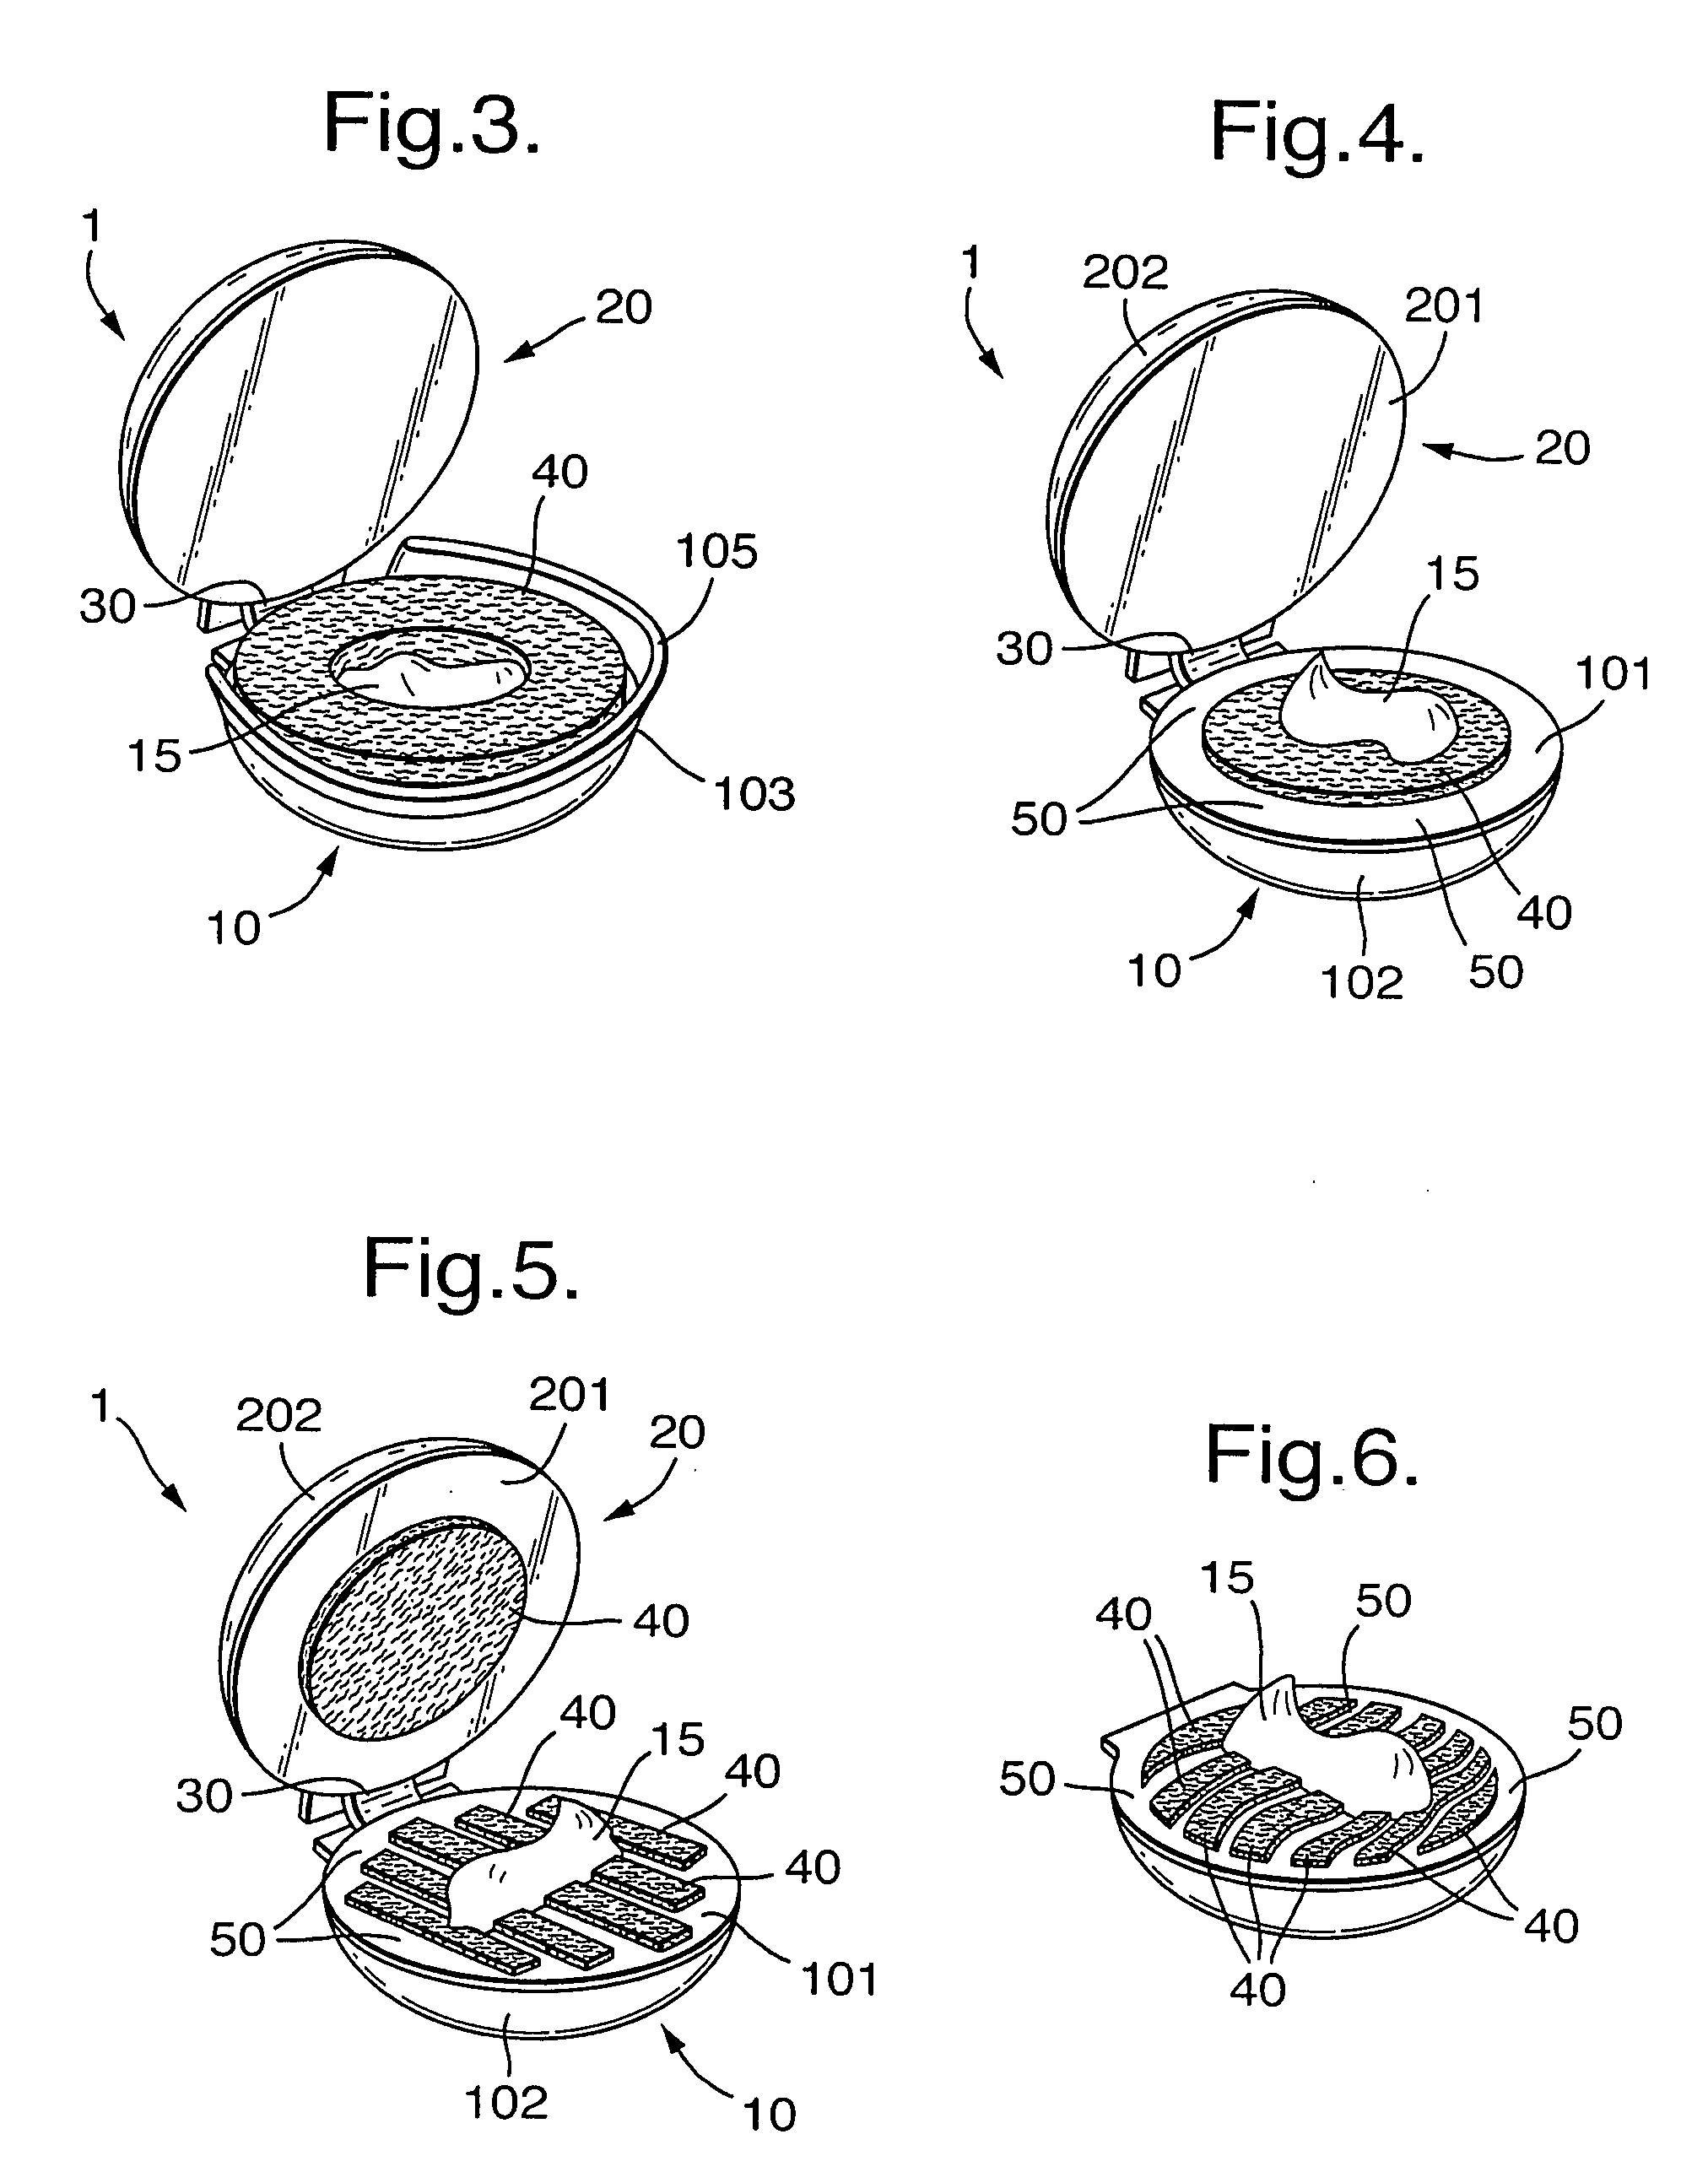 Hair treatment application system comprising an absorbent substrate